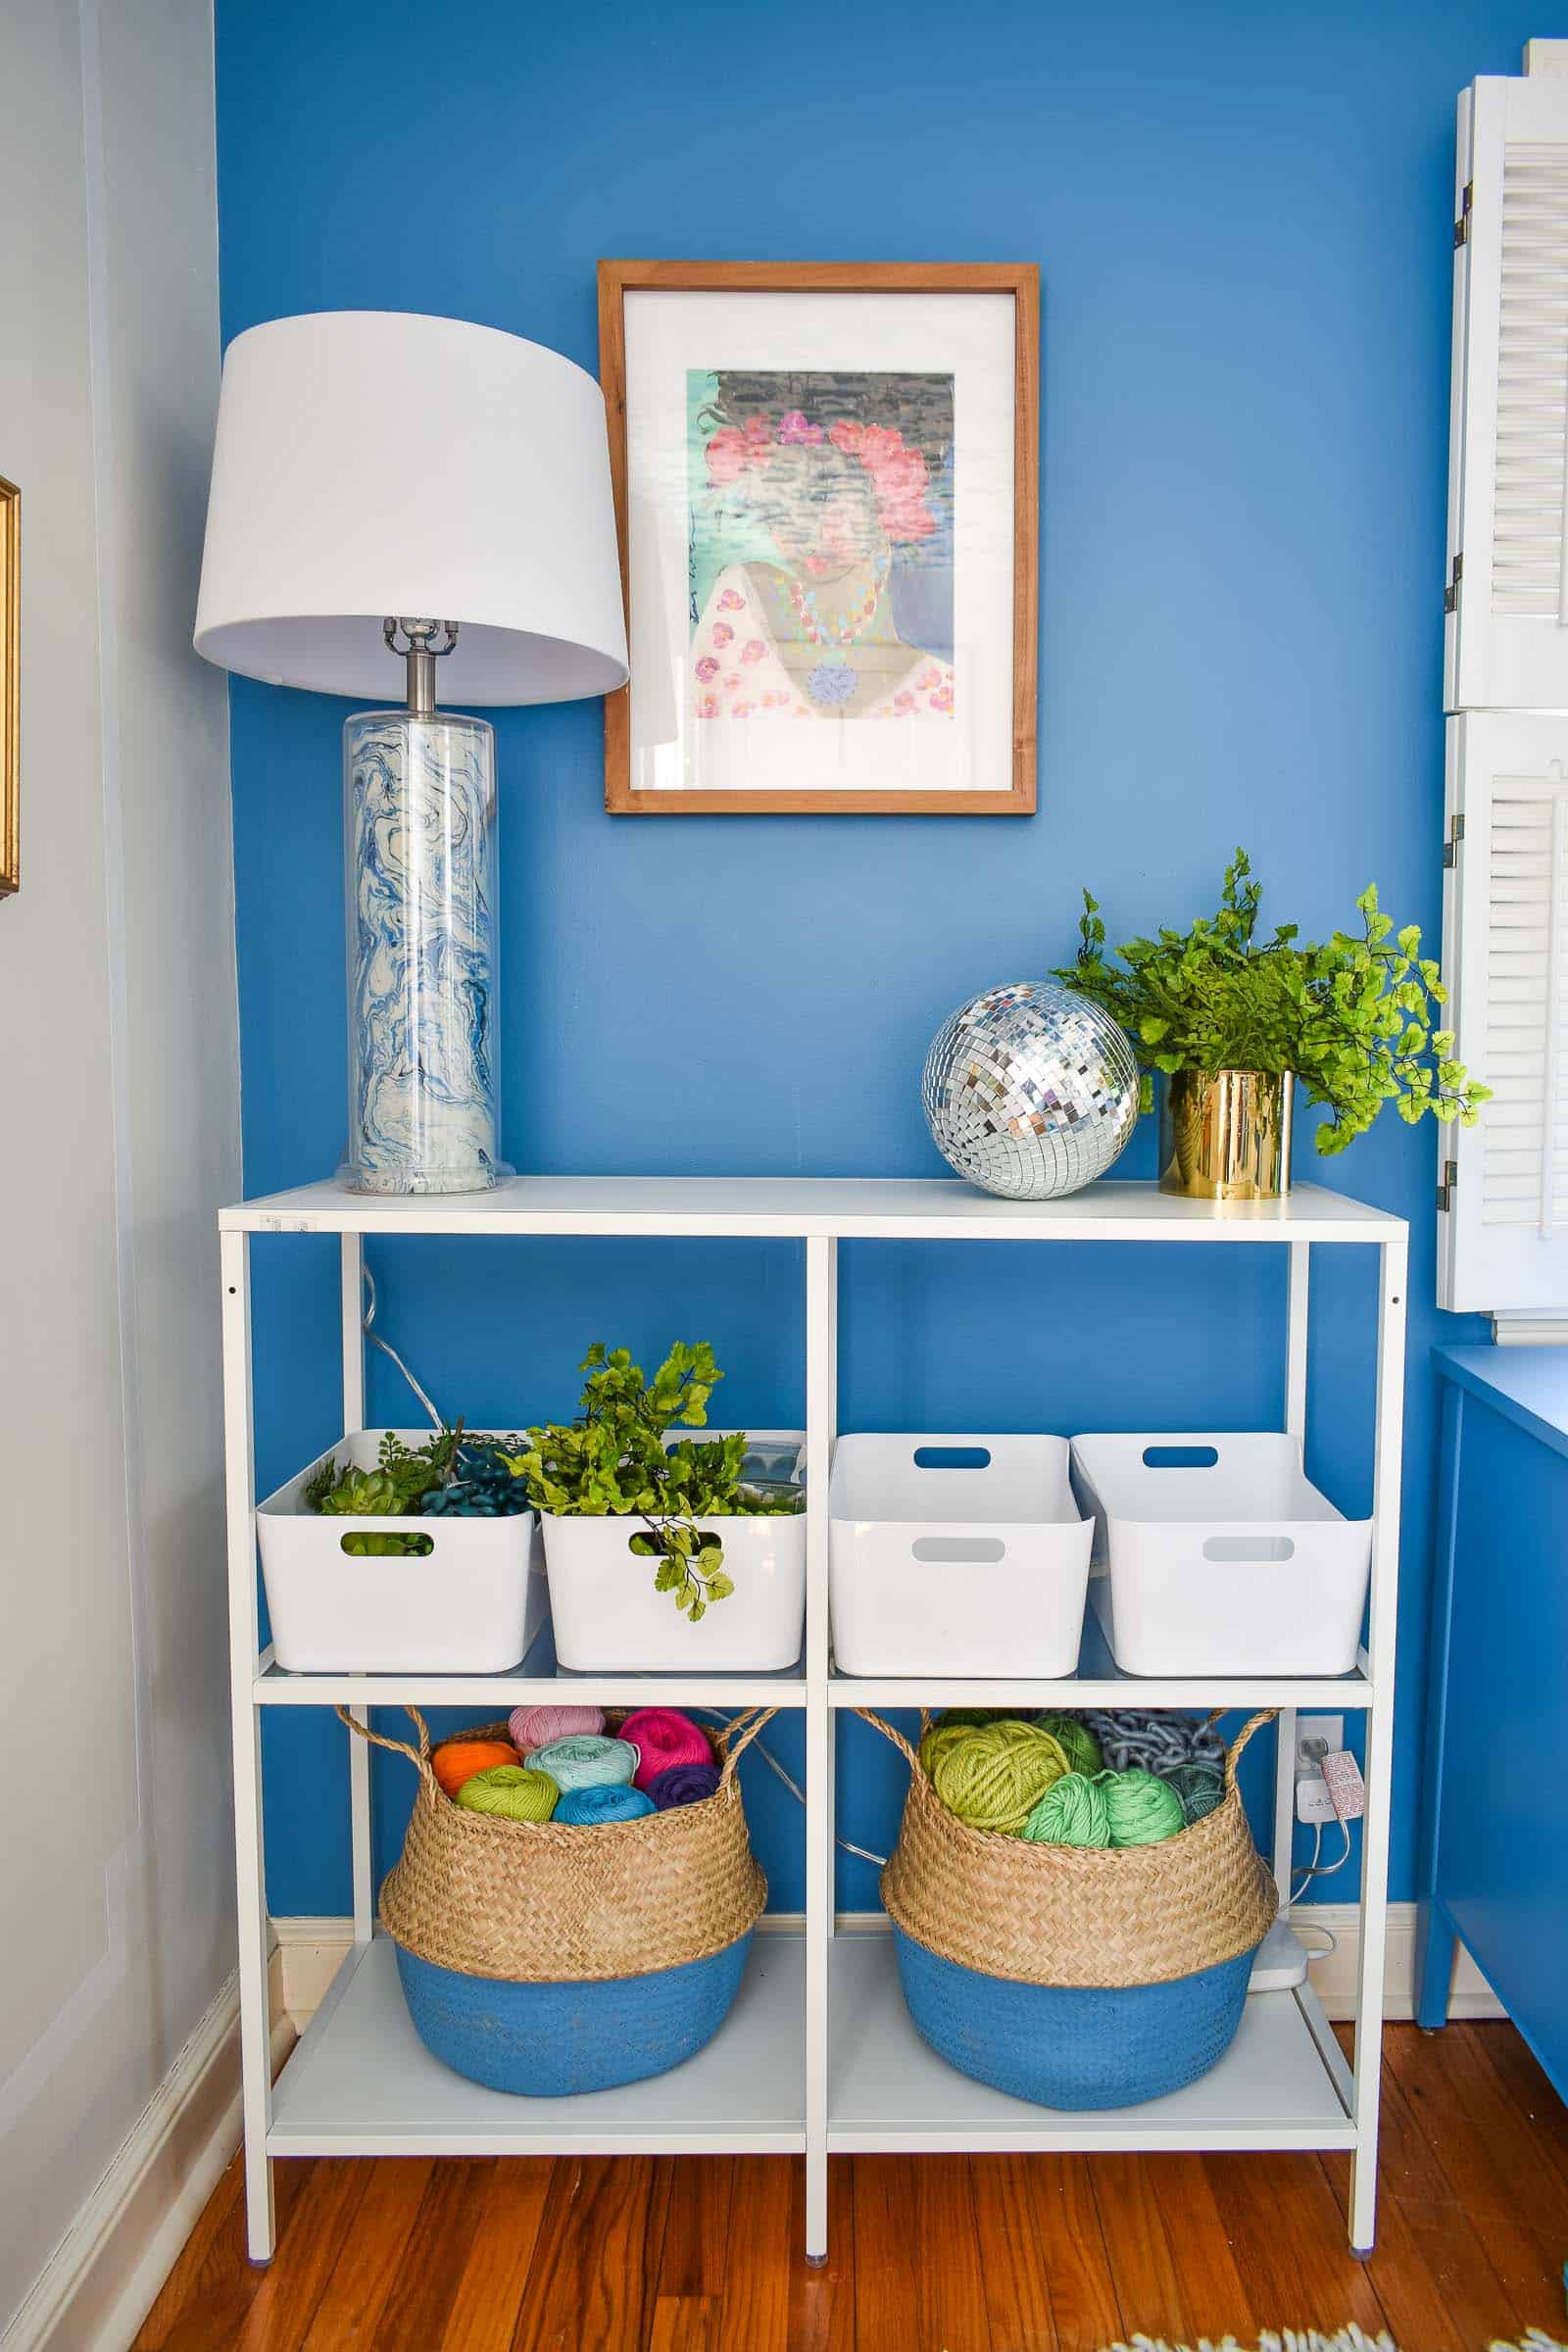 painted baskets in colorful office